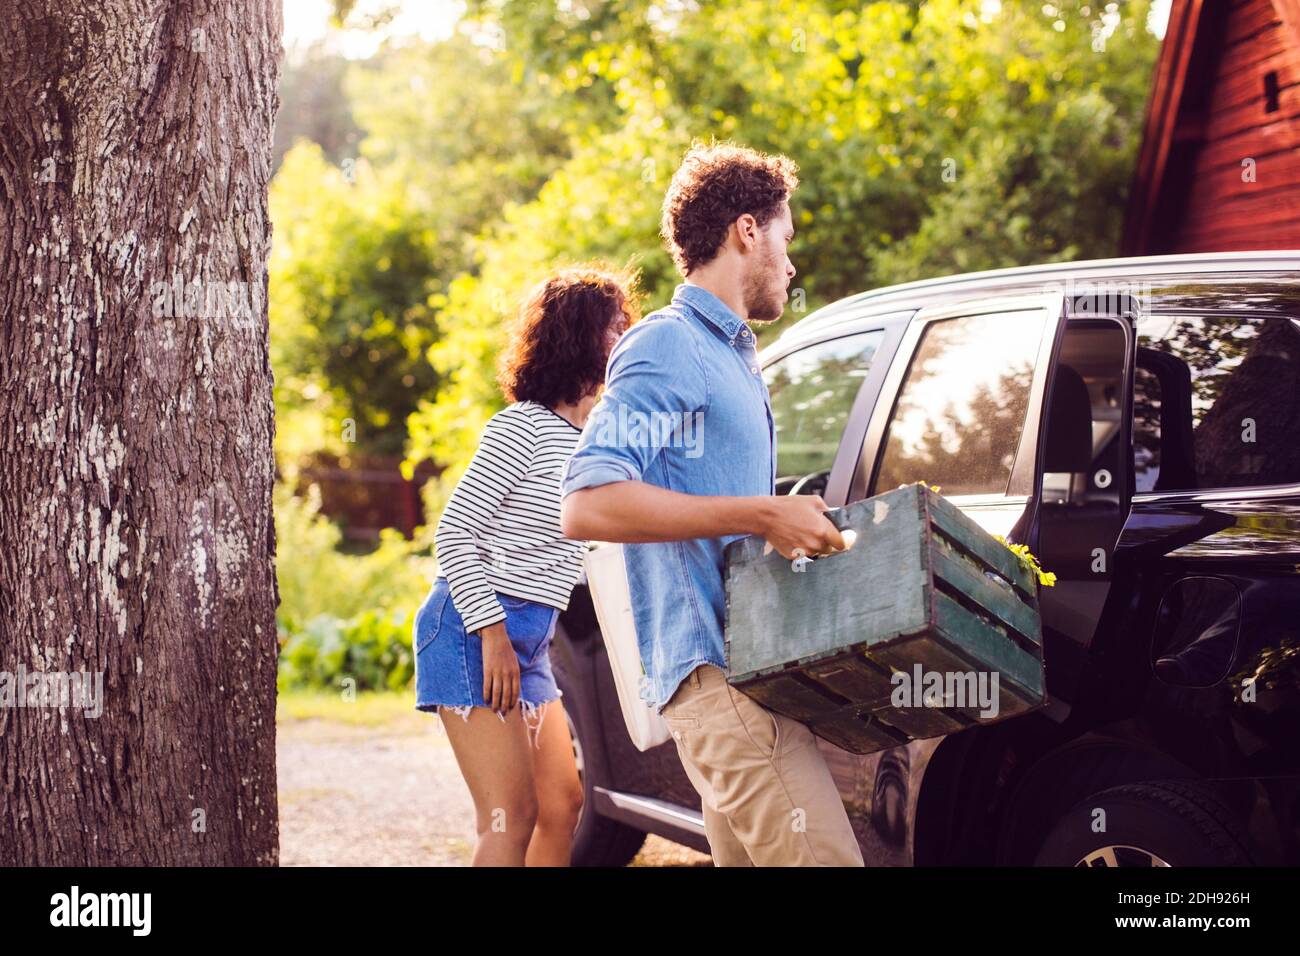 Man holding crate while standing with woman by car on sunny day Stock Photo